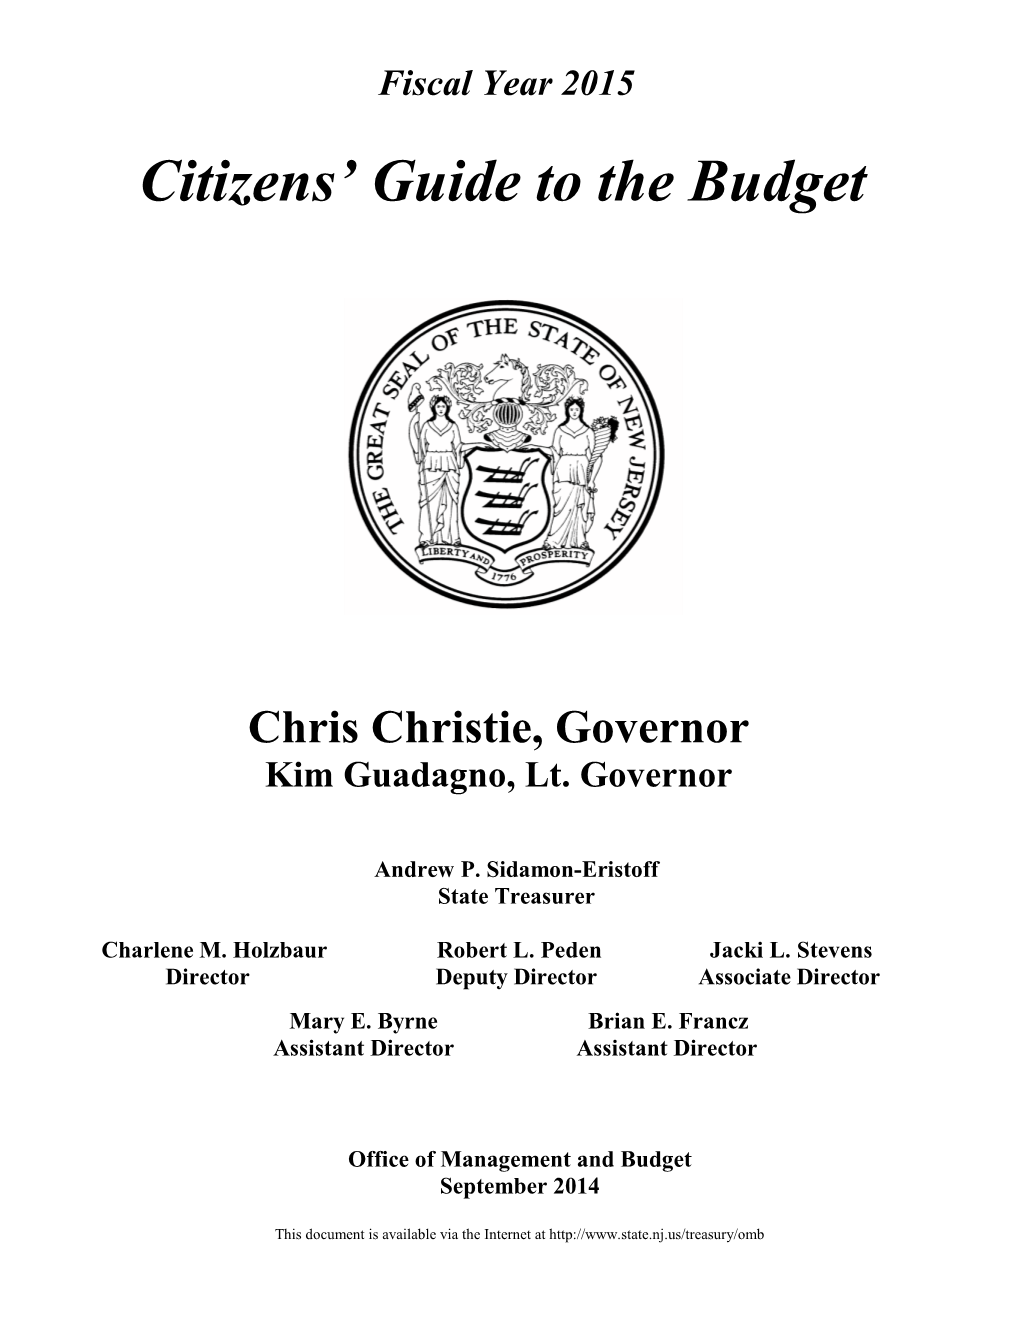 Citizens' Guide to the Budget